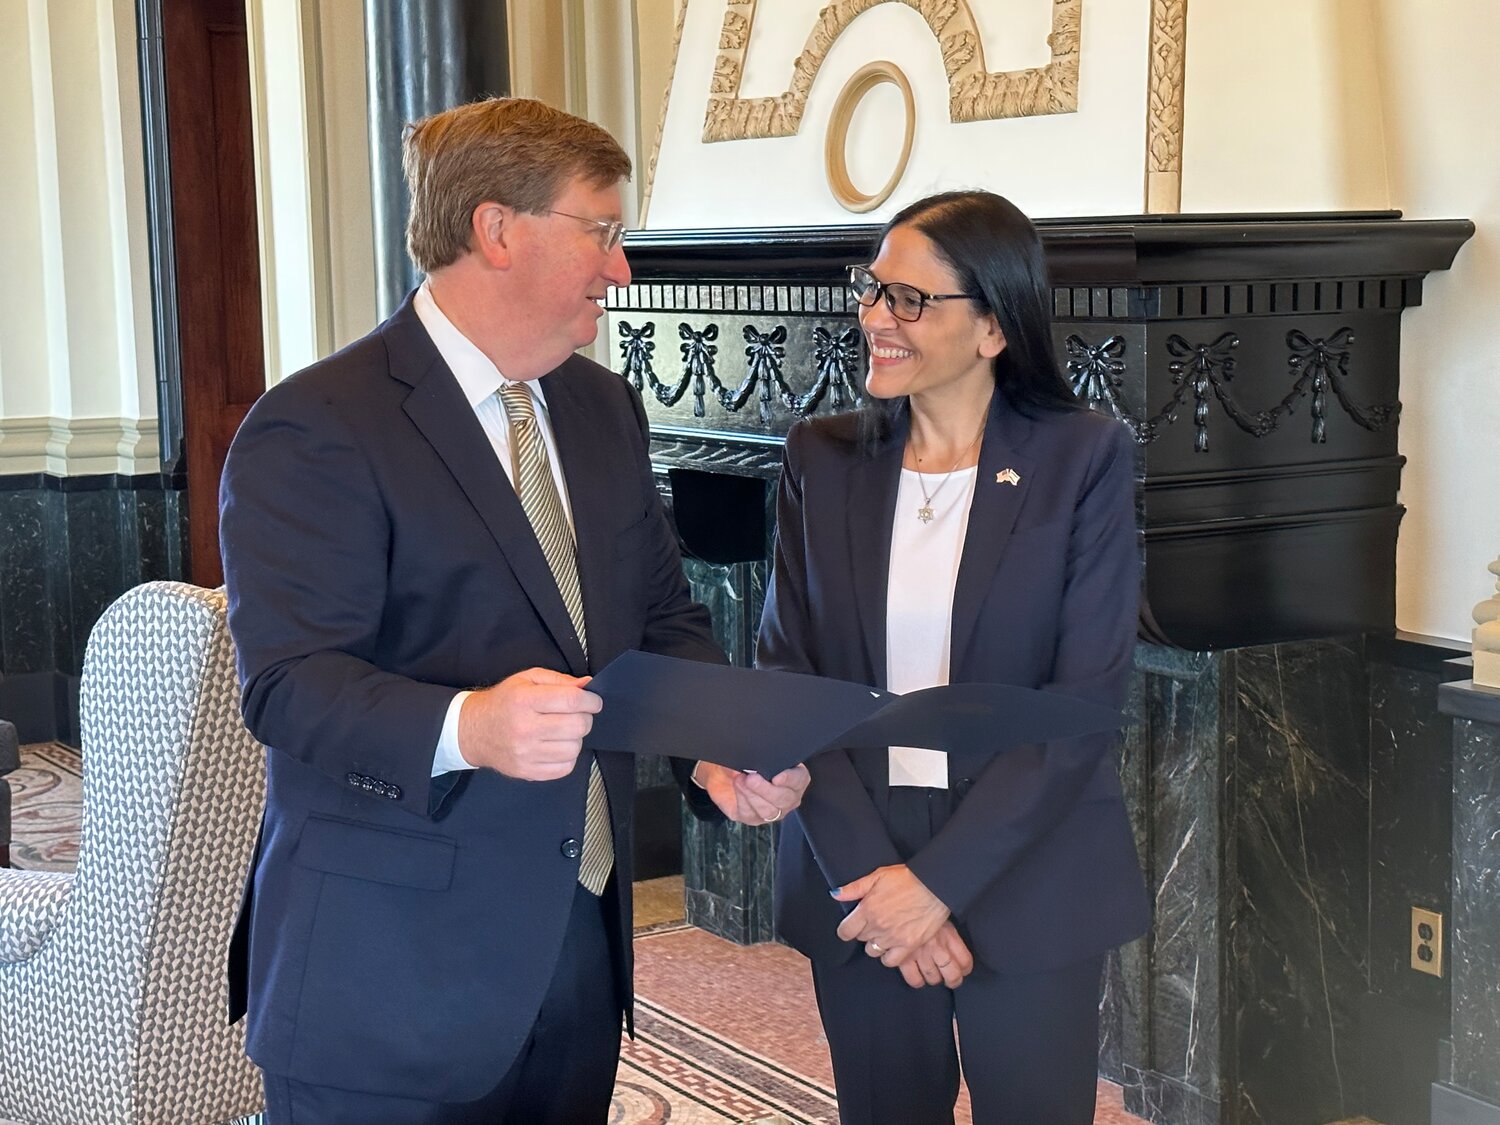 Mississippi Governor Tate Reeves hands Consul General of Israel Anat Sultan-Dadon a copy of the gubernatorial proclamation honoring Israel on its 75th Independence.